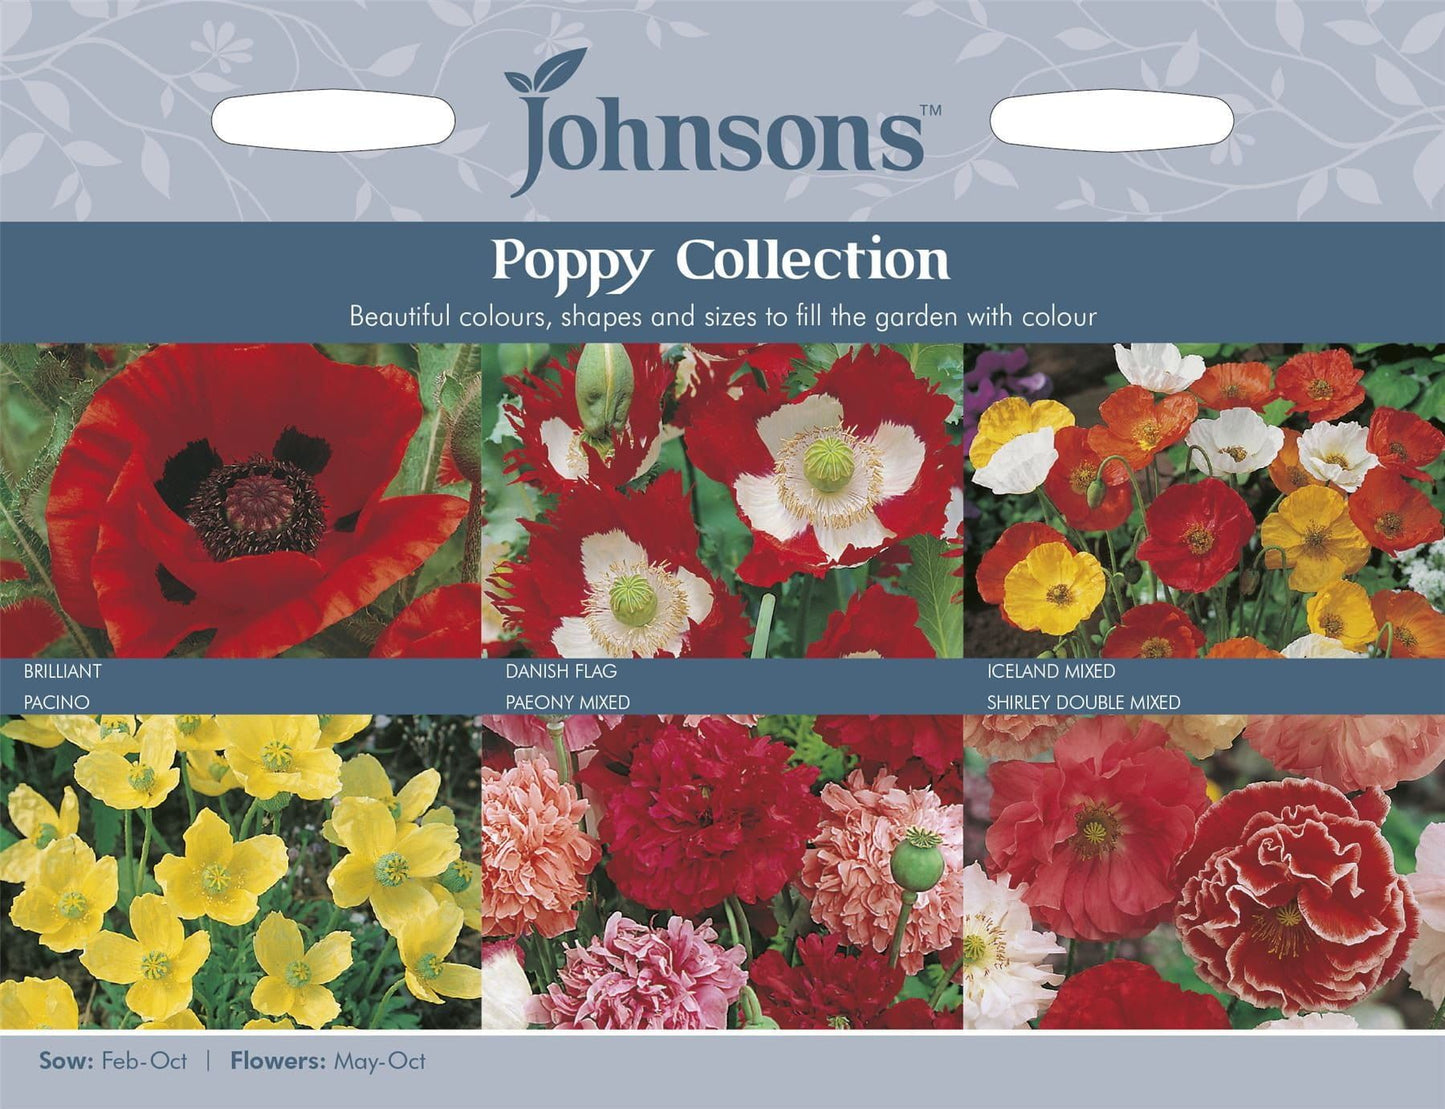 Johnsons Poppies Collection